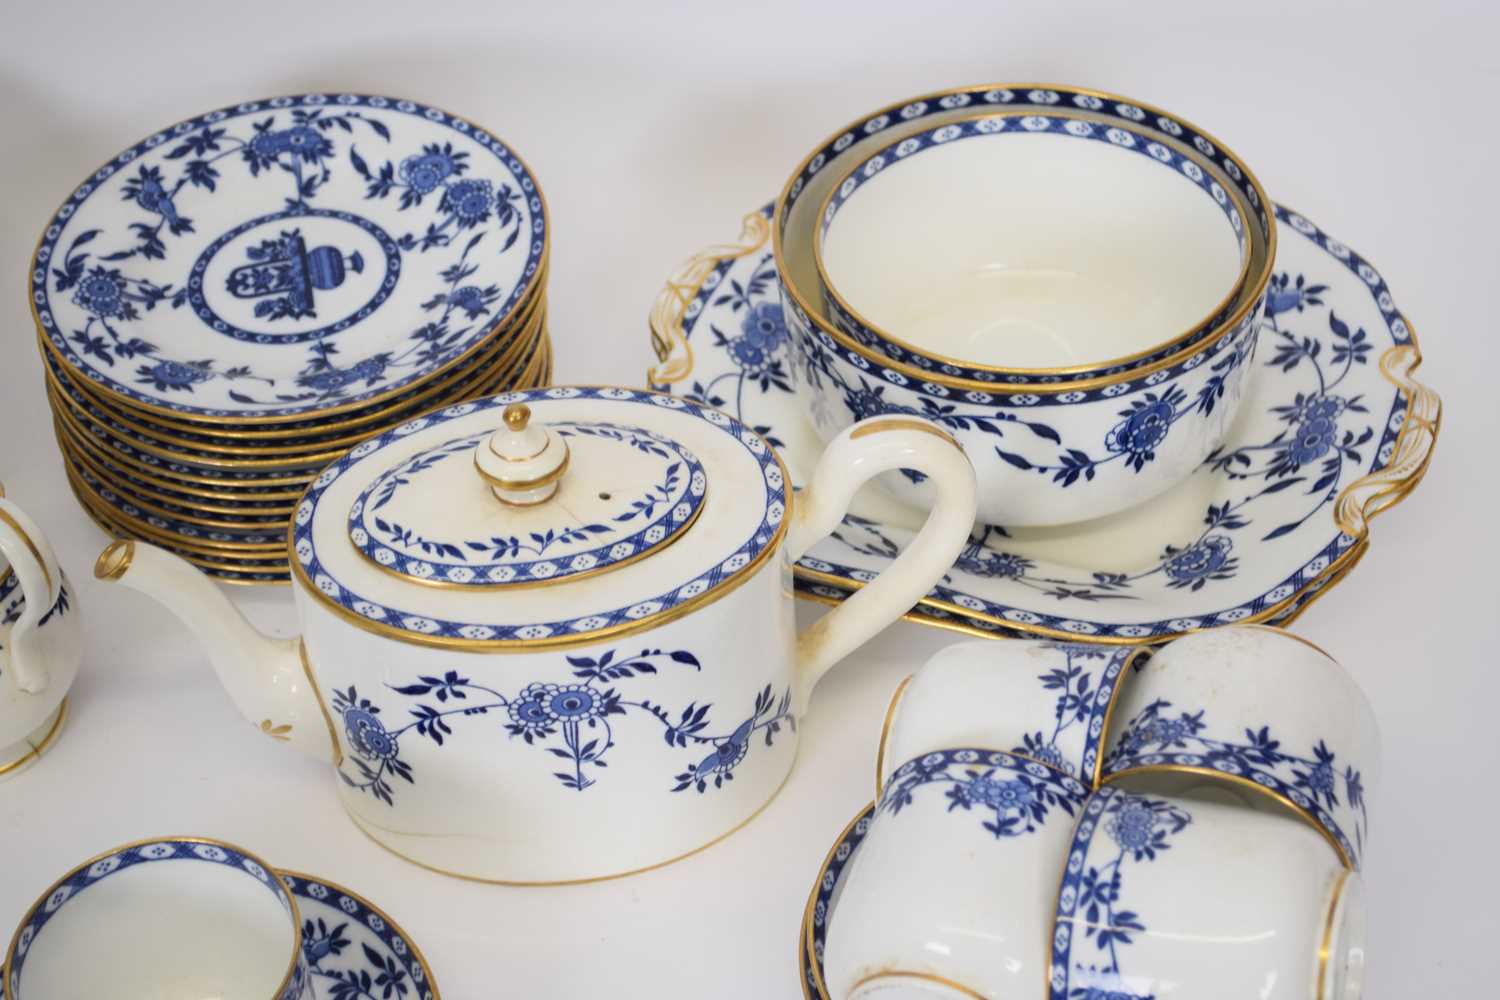 Extensive late 19th century Minton tea set all decorated in the Delft pattern including 12 cups, - Image 5 of 5